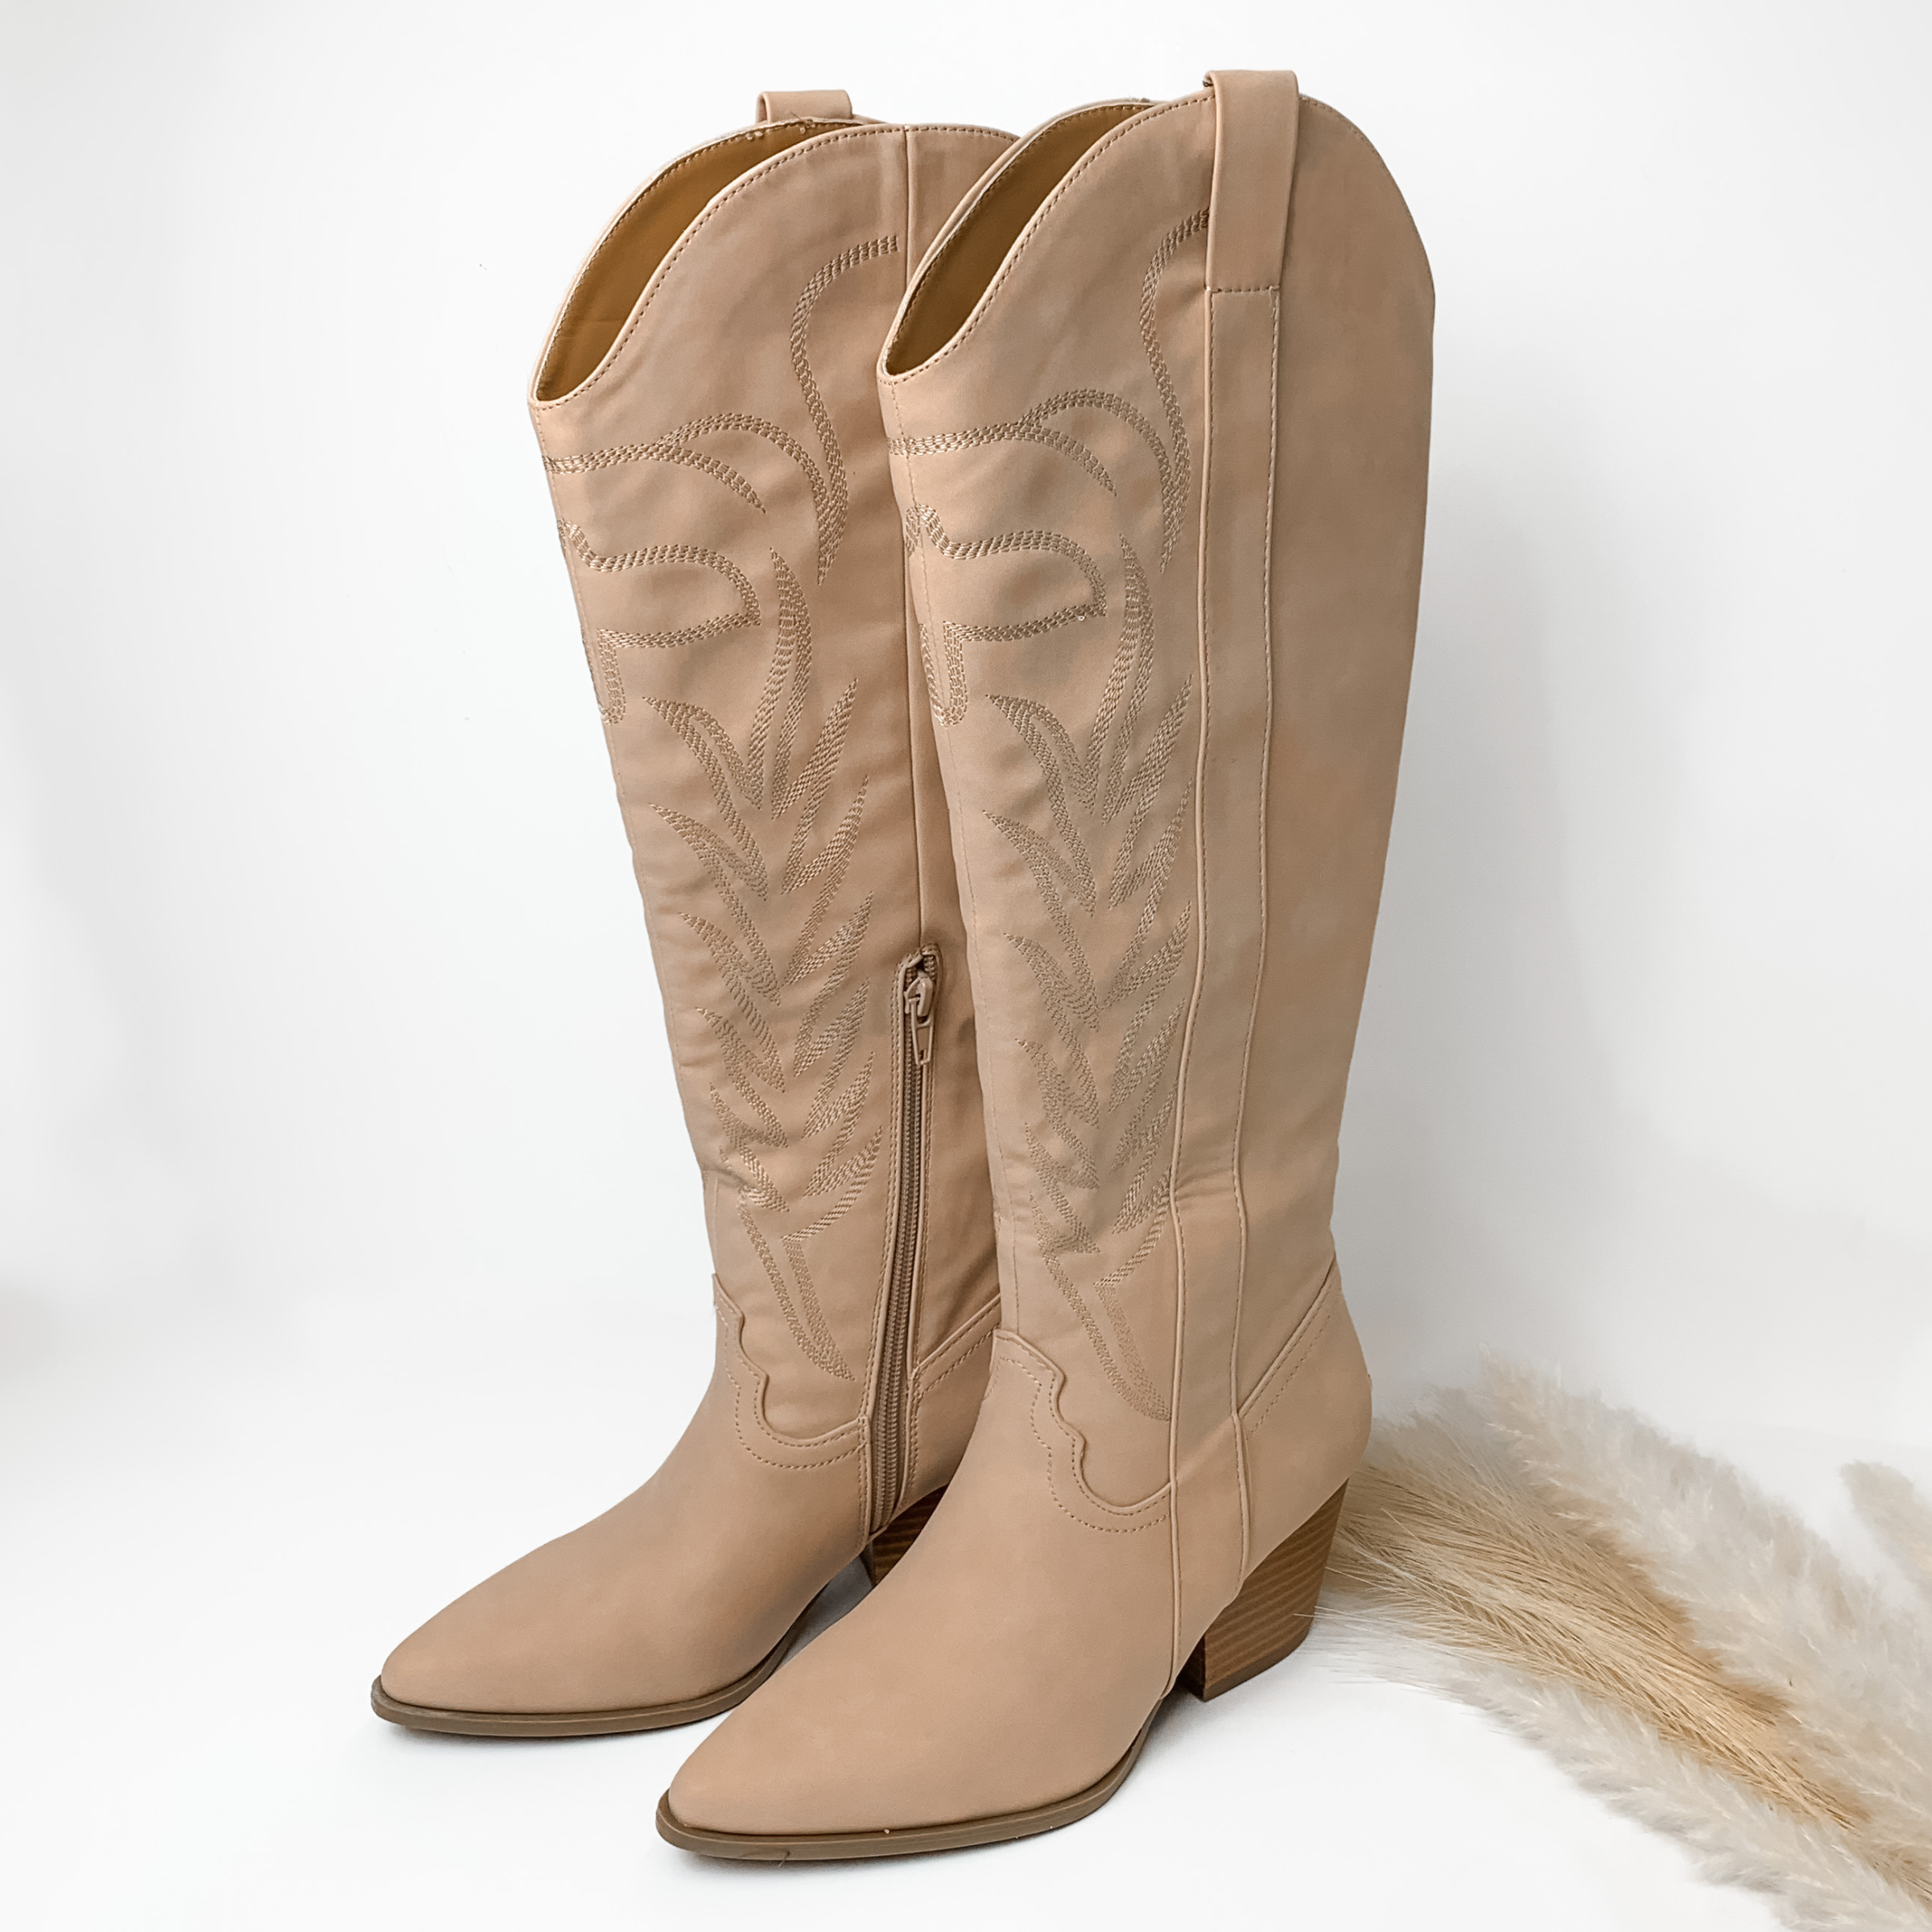 Nude tall boots with nude western stitching and tan heel. These boots are pictured on a white background with some ivory pompous grass on the right side of the boots. 